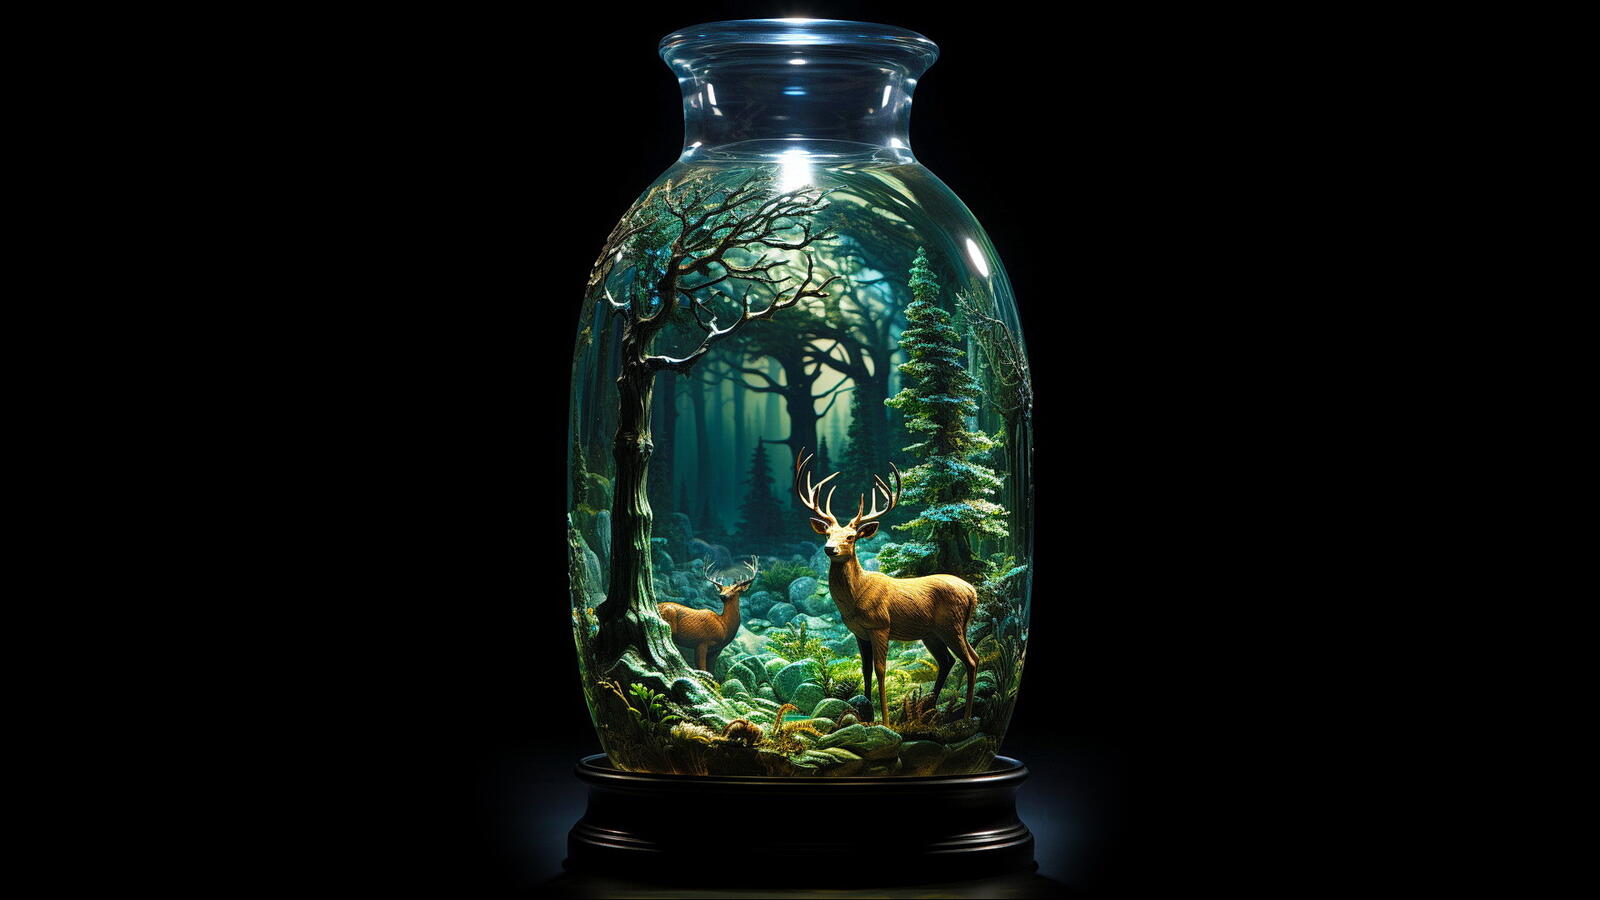 Free photo Reindeer in a jar on a black background